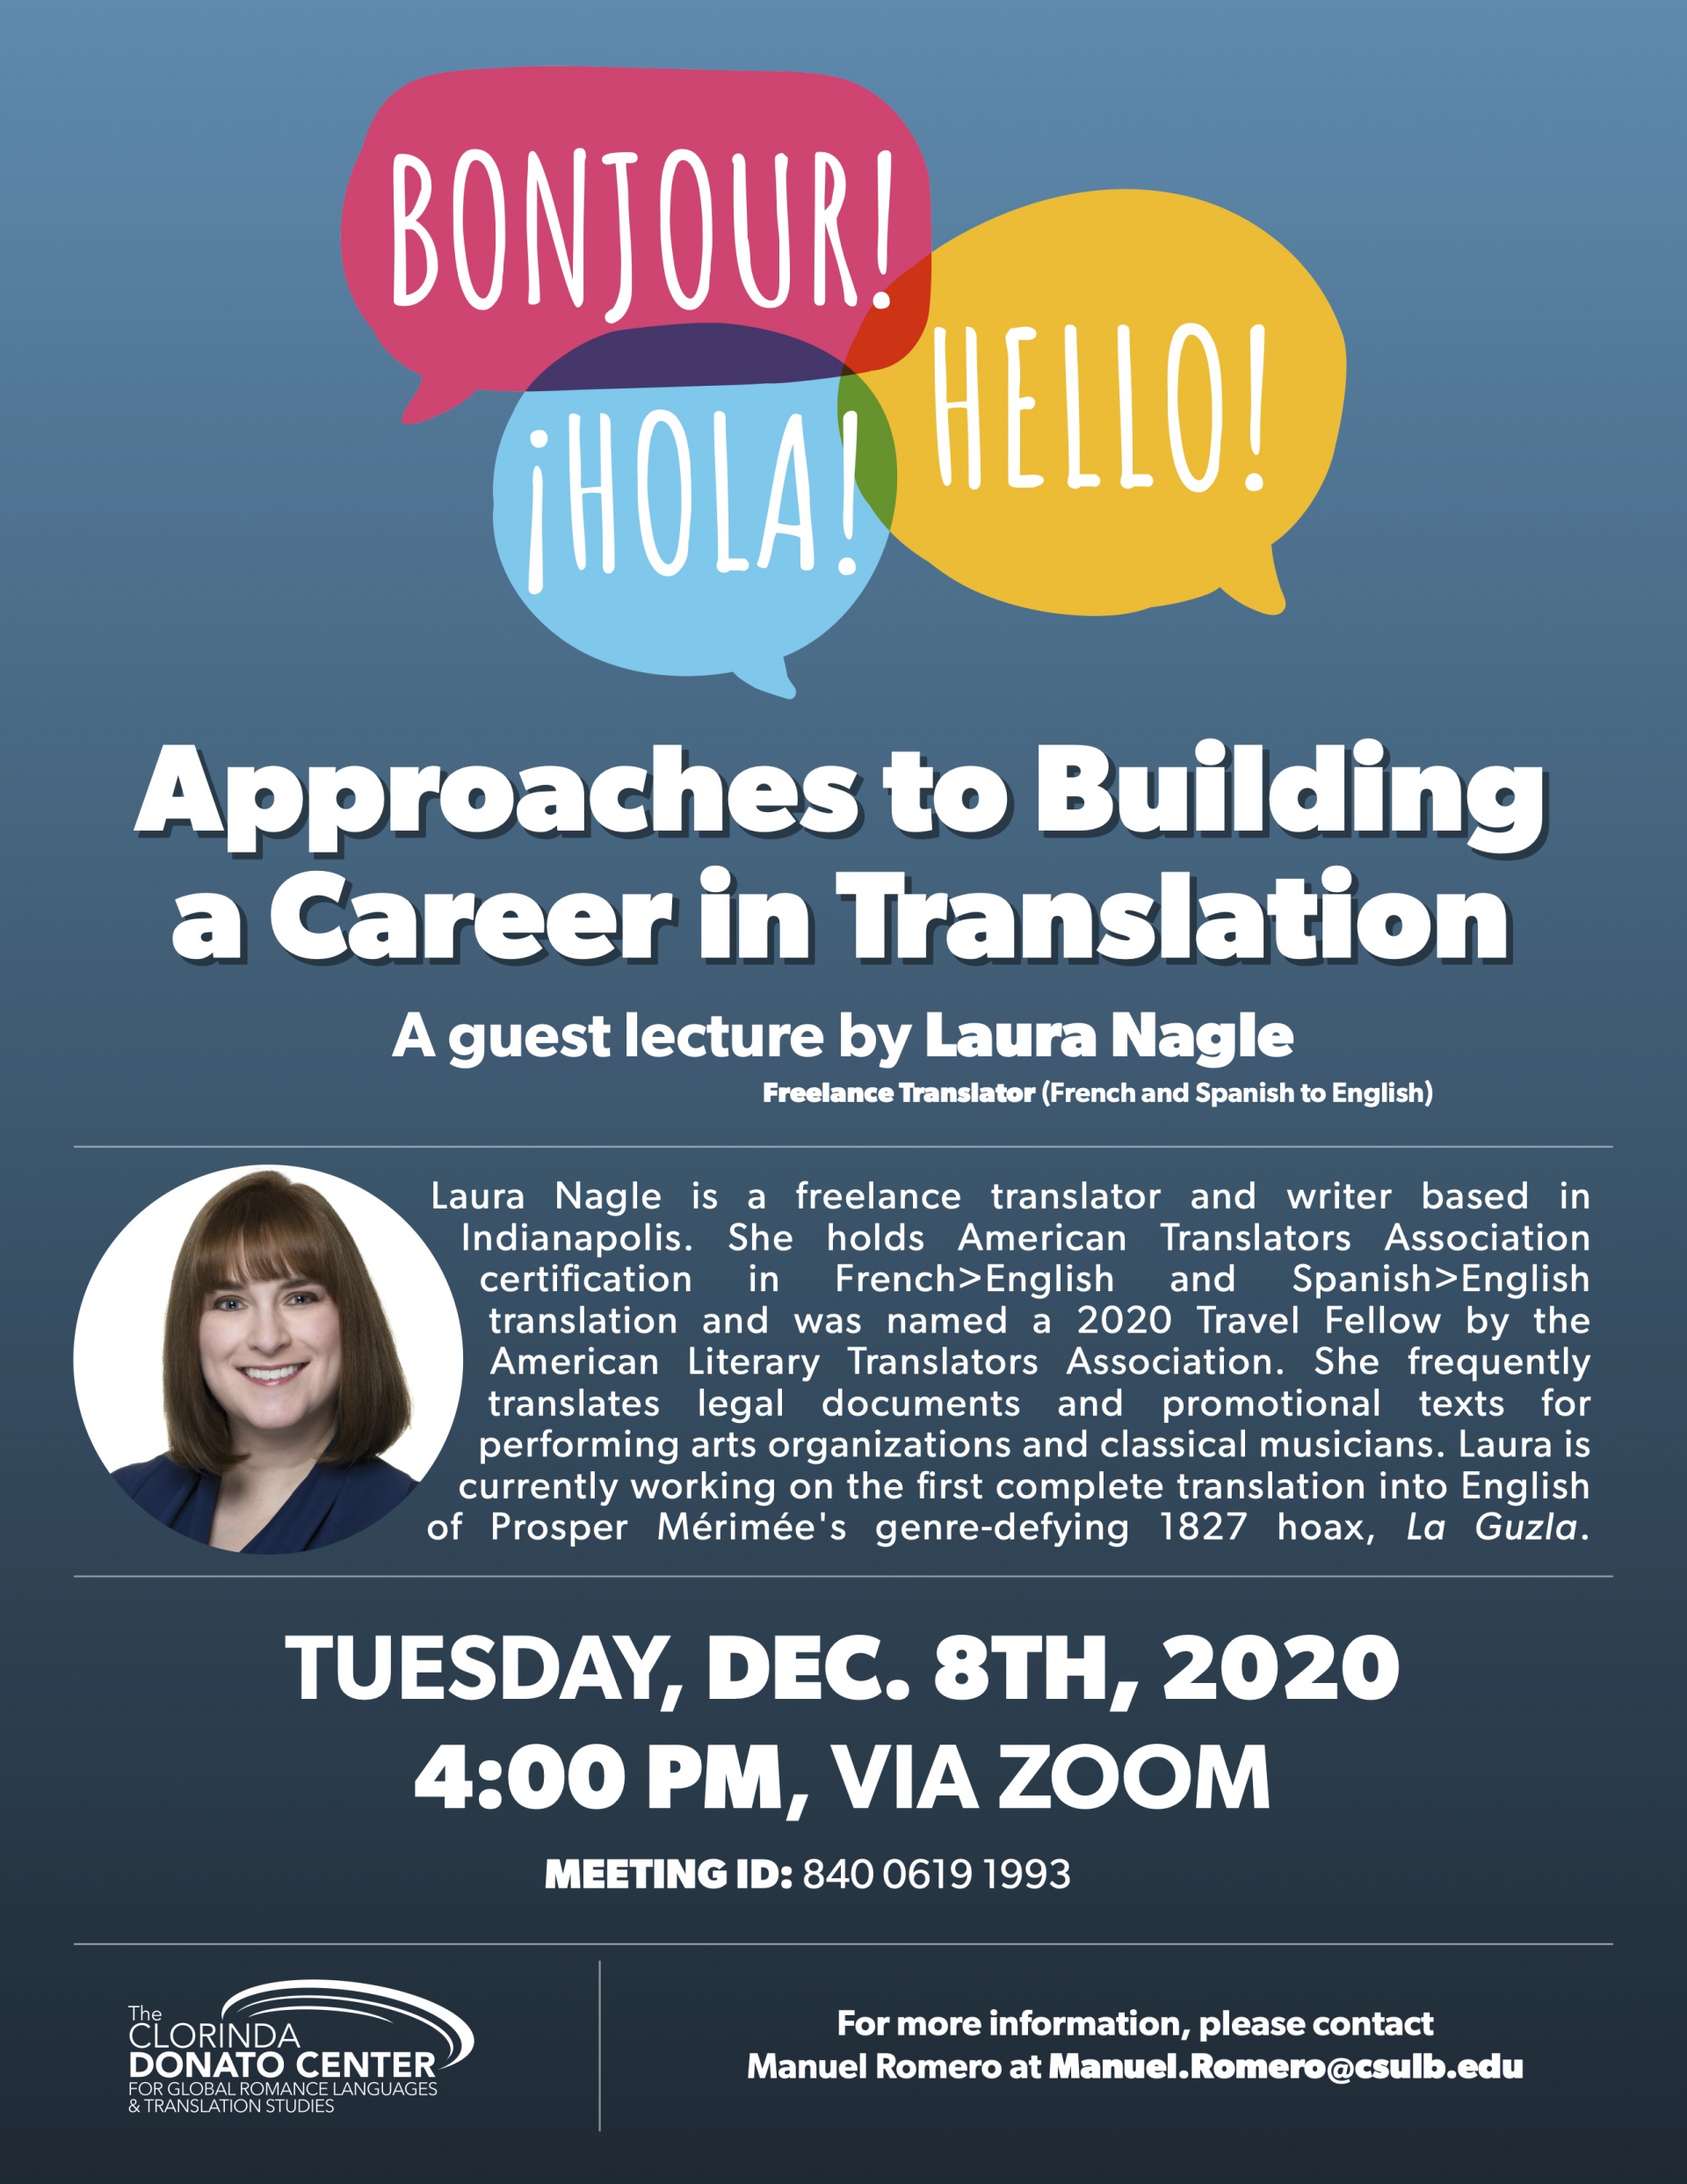 Flyer for lecture by Laura Nagle